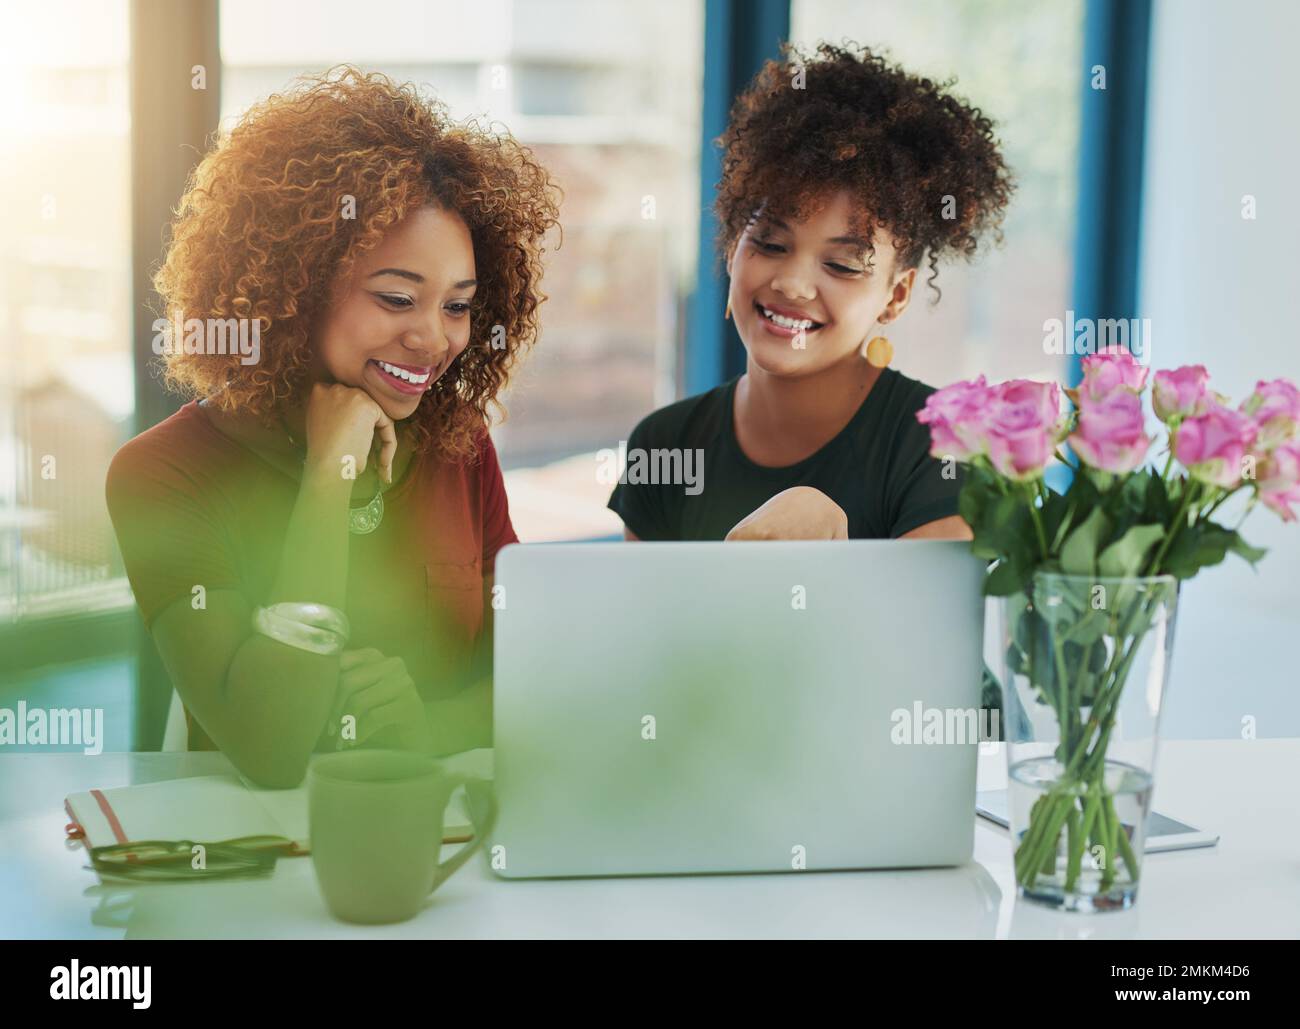 Together we can do great things. two young designers working on a laptop together. Stock Photo